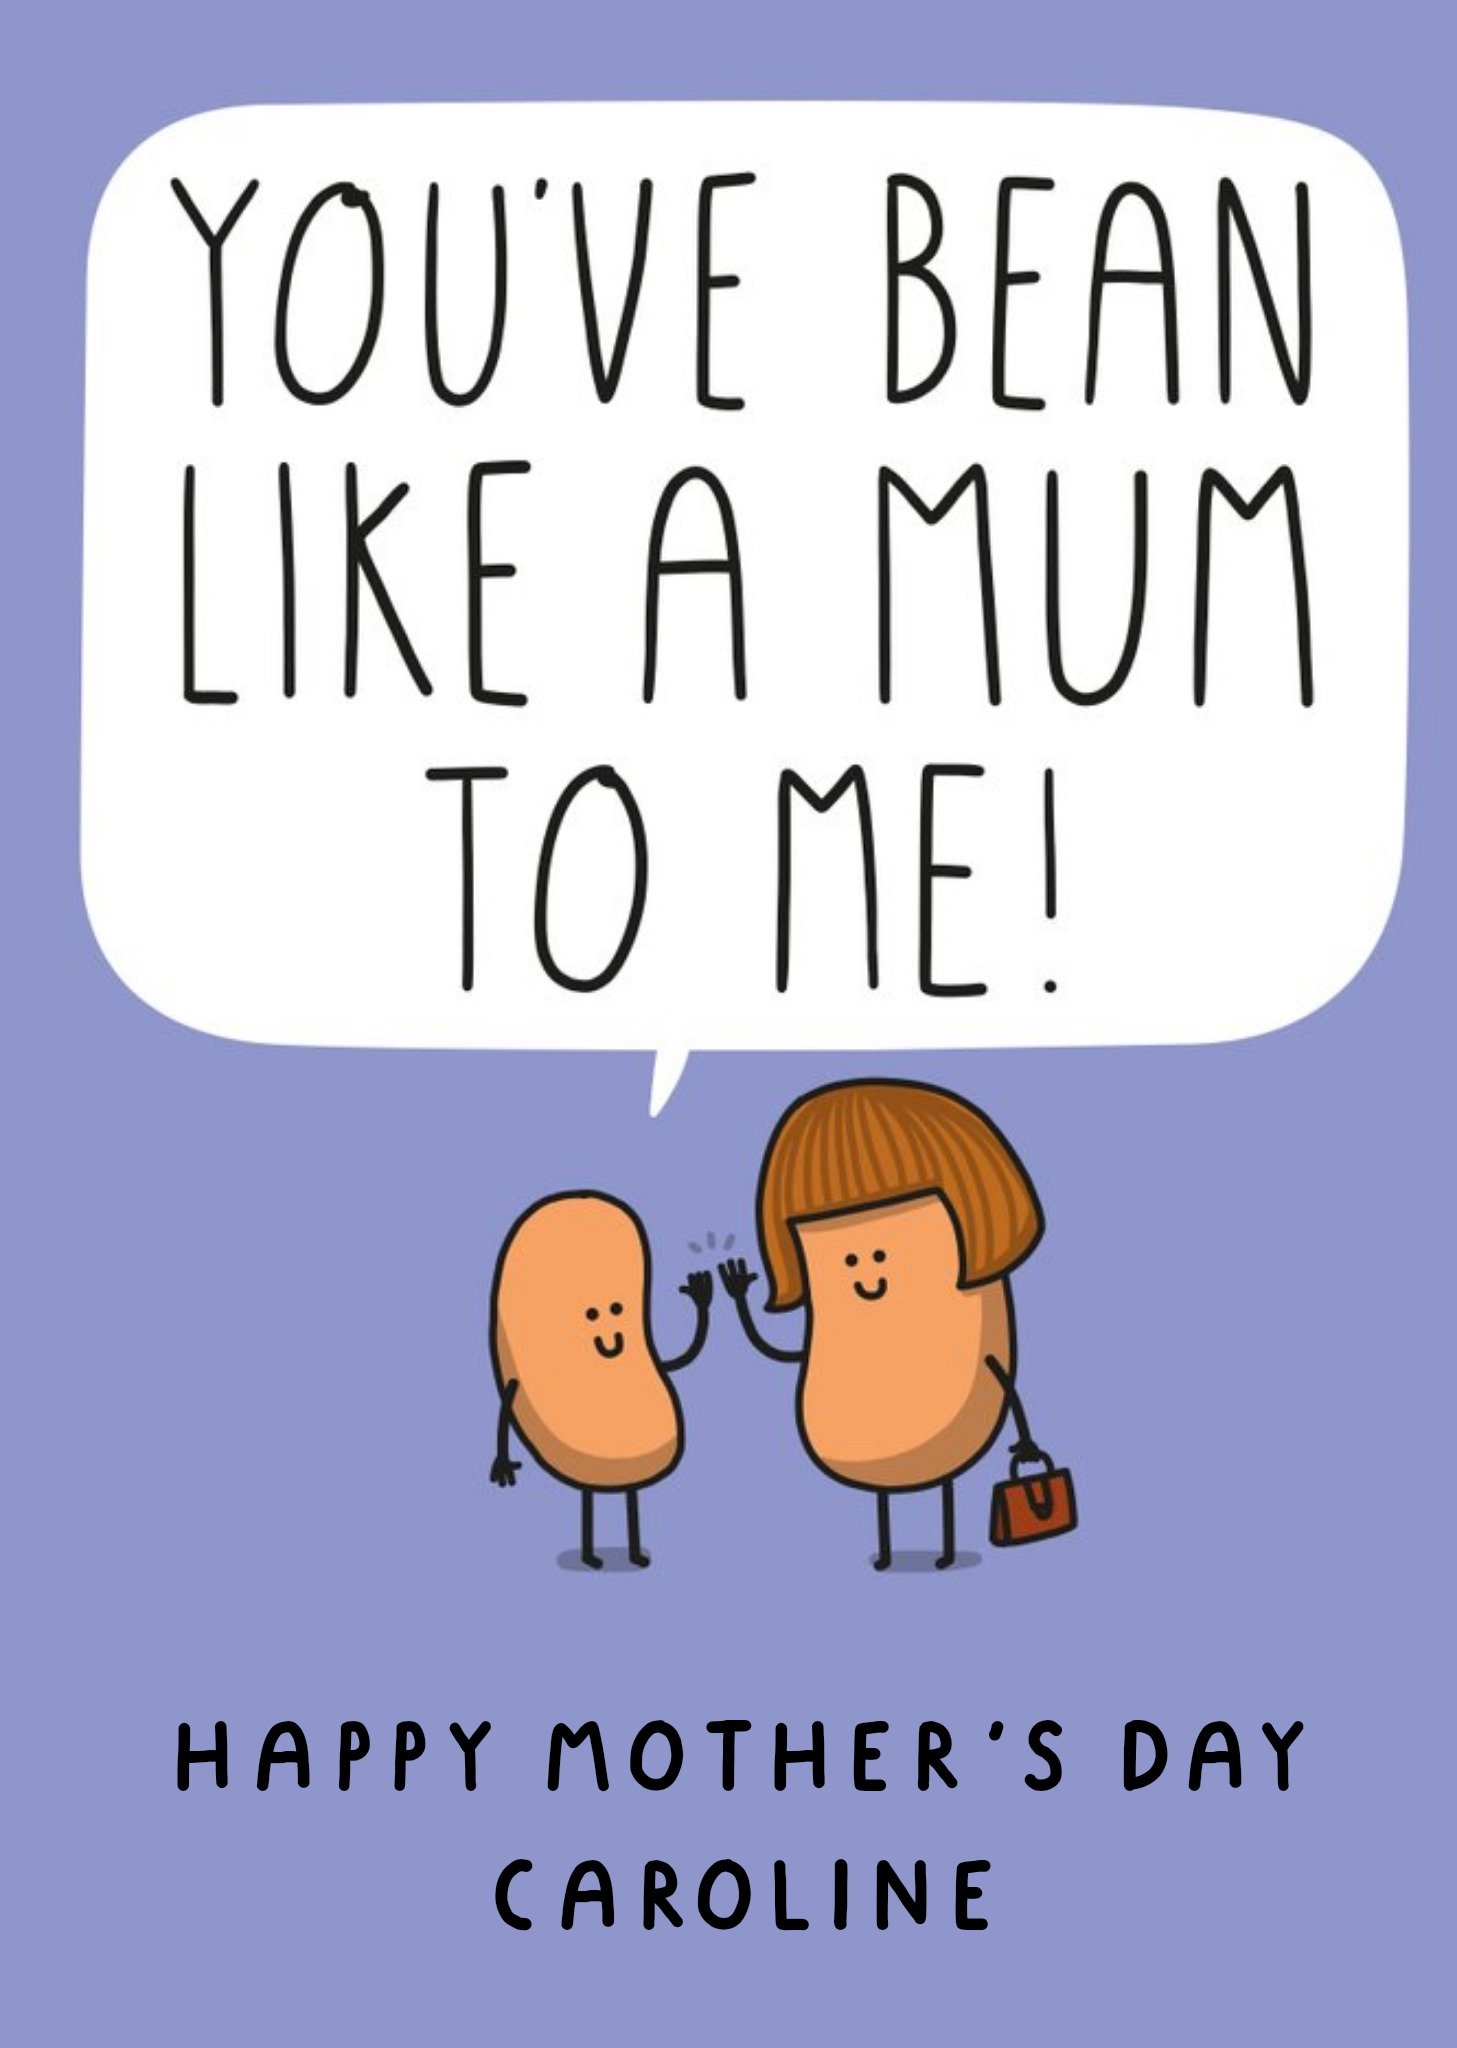 Moonpig Illustration Of Two Bean Characters Funny Pun Mother's Day Card Ecard